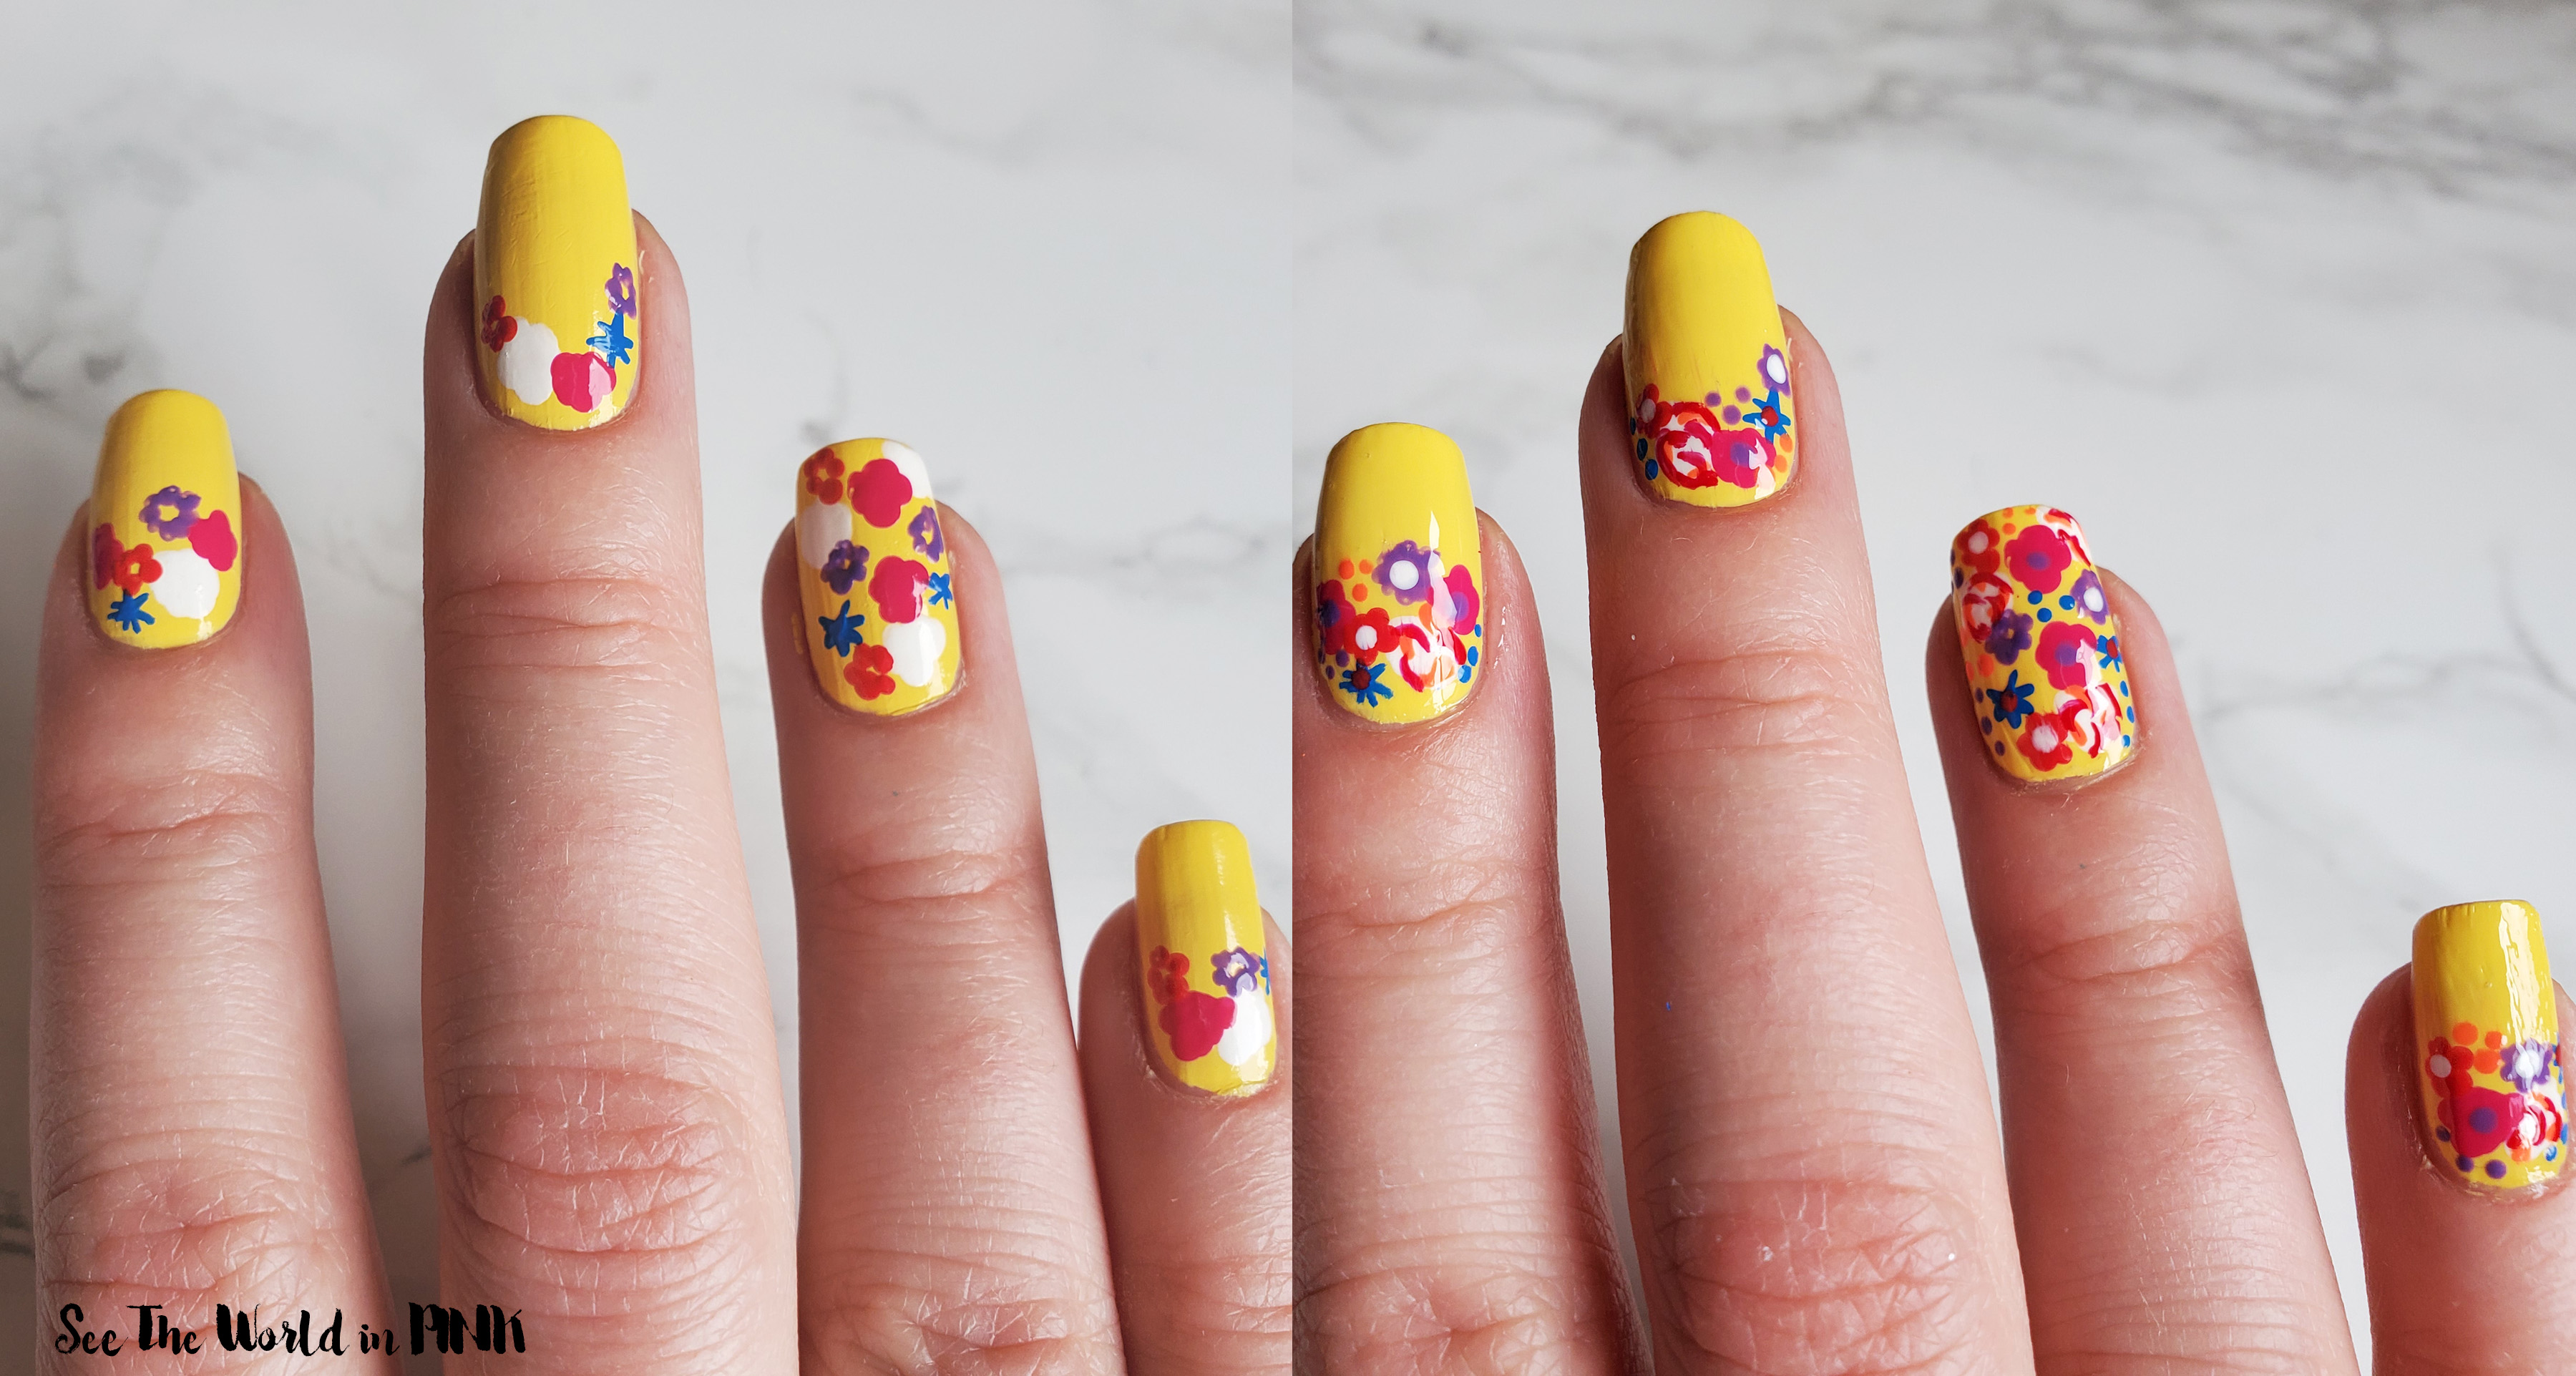 Manicure Monday - Colourful Spring Flower Nail Art